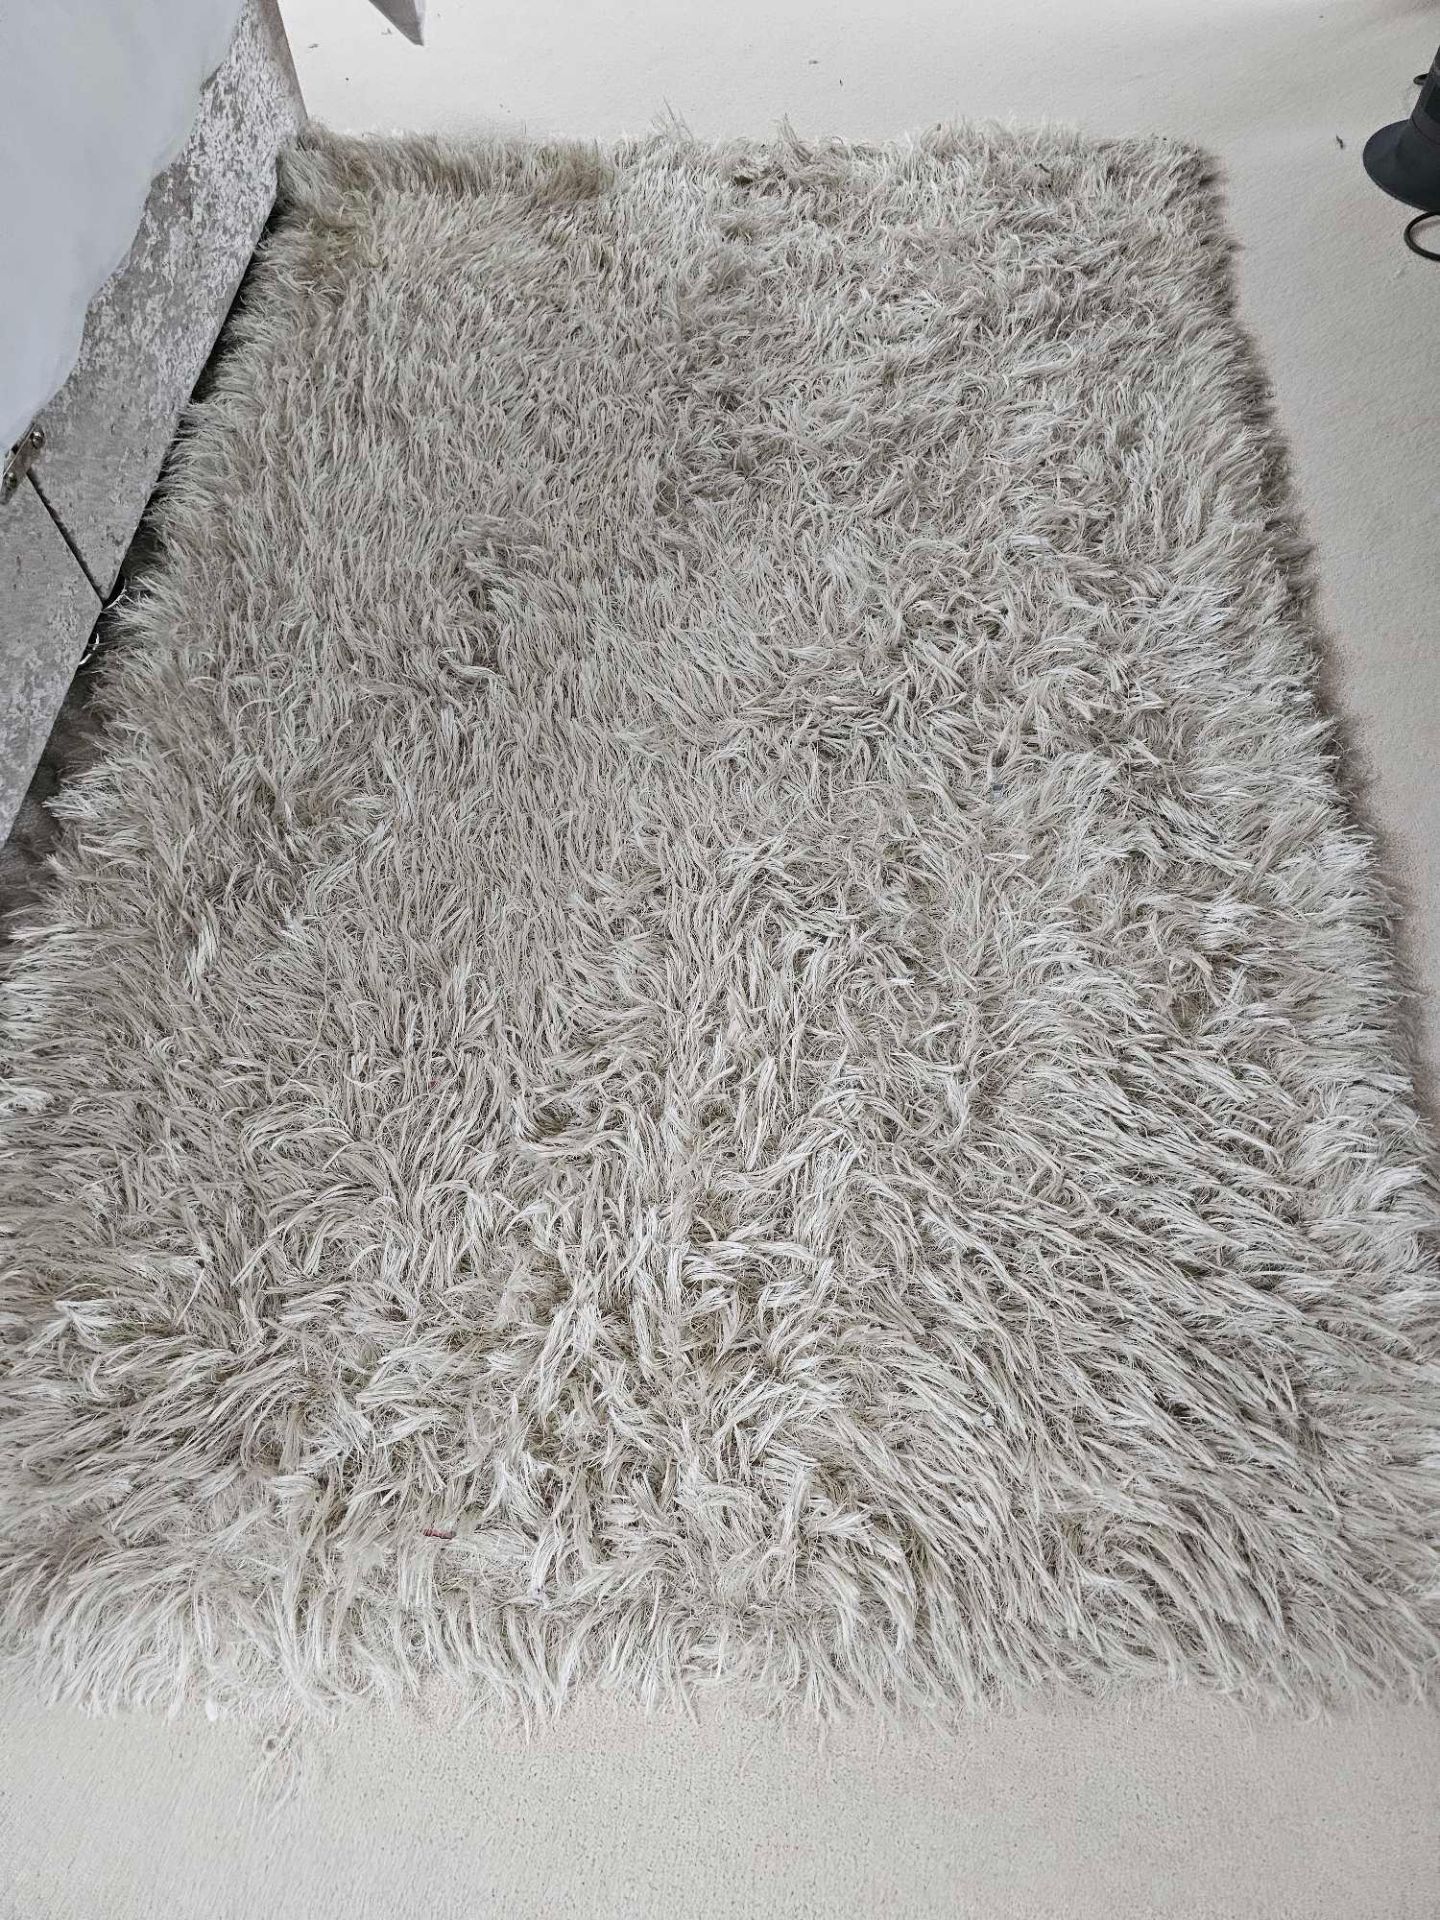 A Glitz Soft Pile Polyester Silver Rug 118 X 120cm - Image 2 of 4